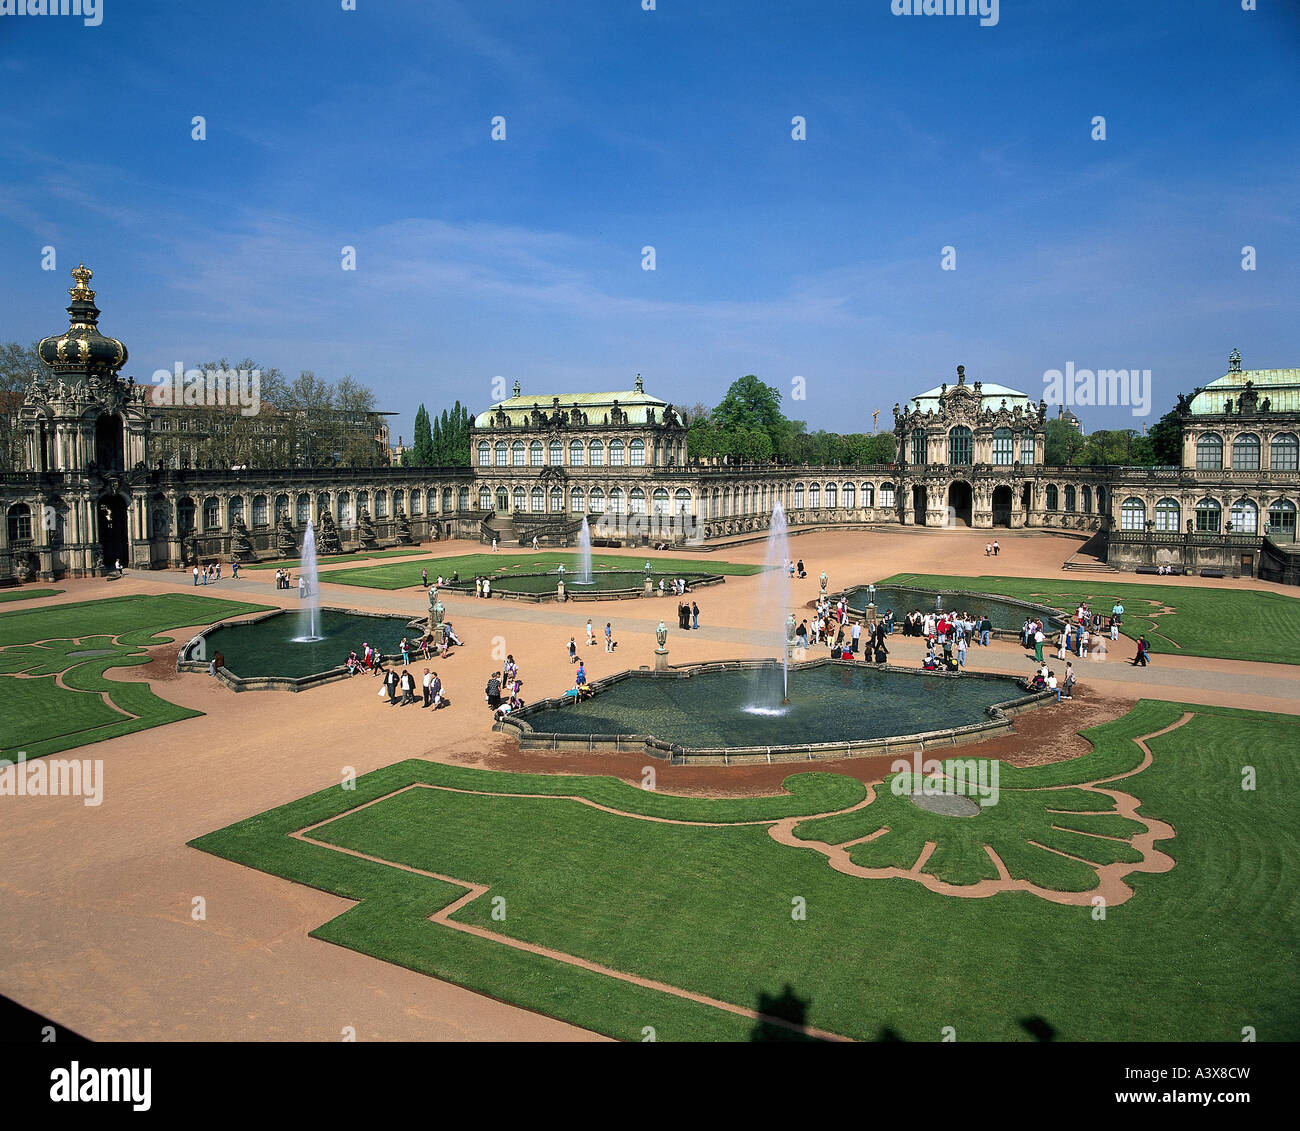 geography / travel, Germany, Saxony, Dresden, Zwinger palace, baroque garden, exterior view, Europe, castle, park, architecture, Stock Photo